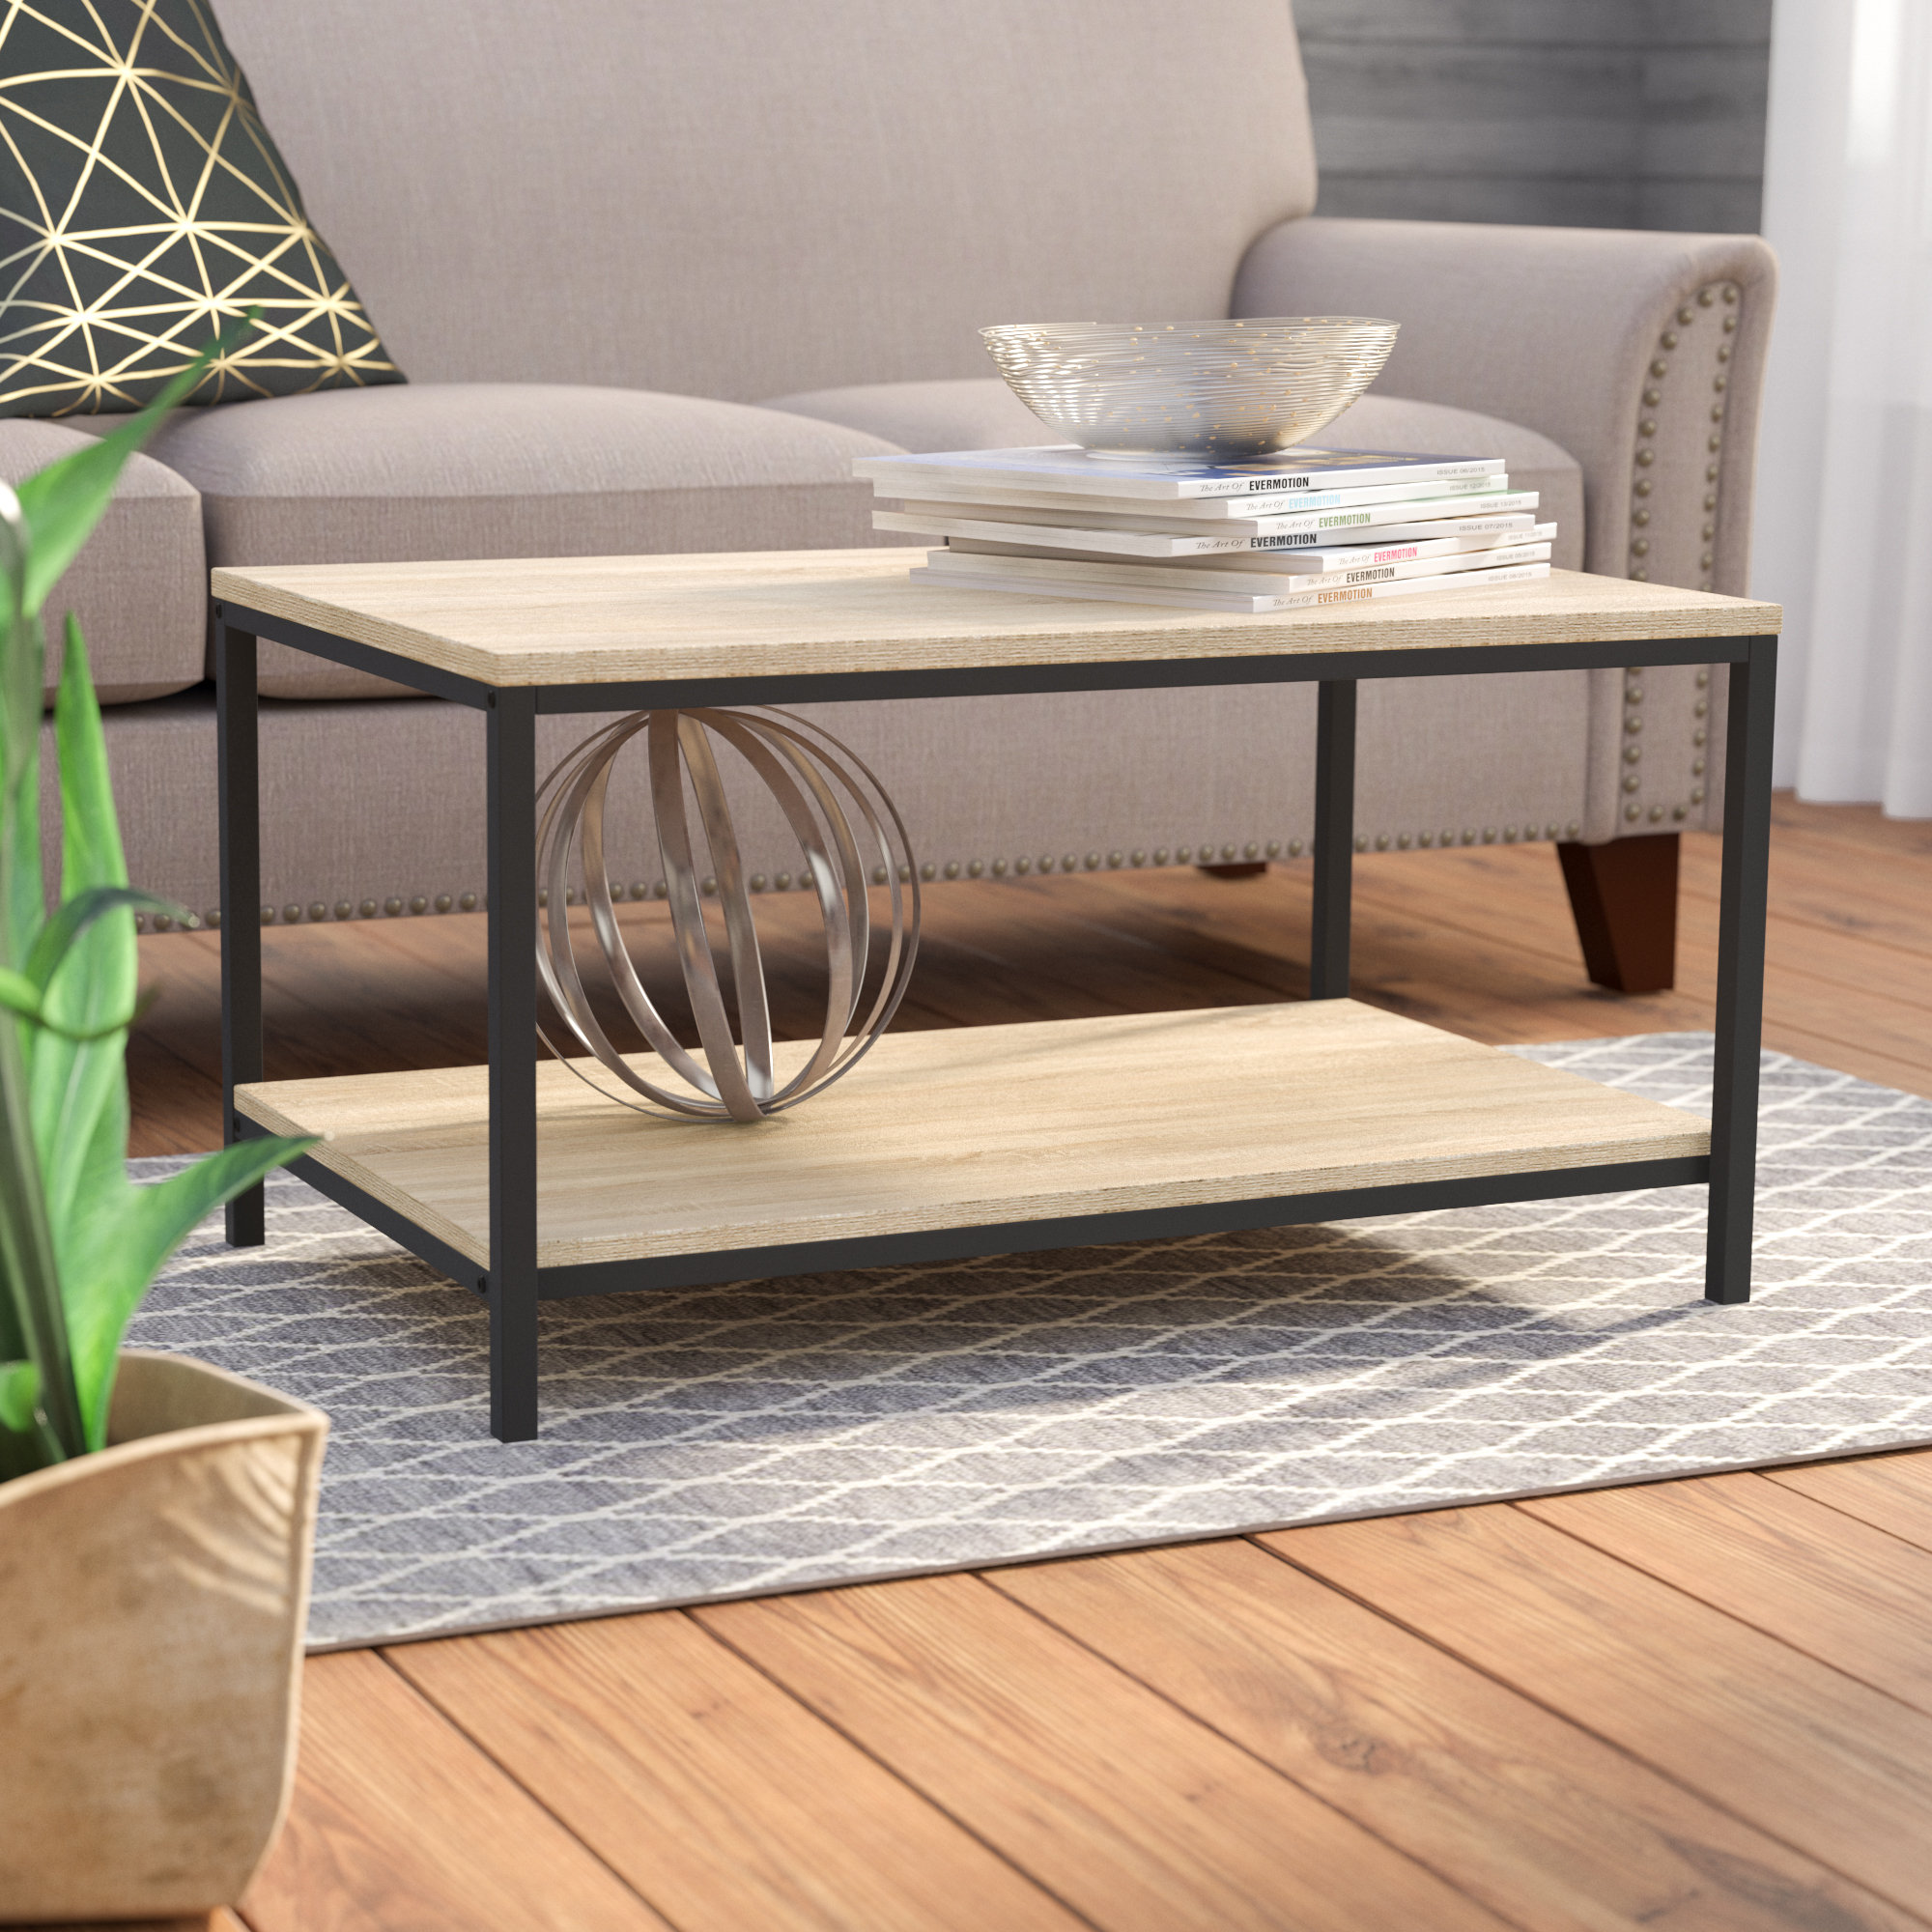 Coffee Table Clear Glass Top 2 Tiers Home Apartment Living Room Table 105 X 52cm for sale online 